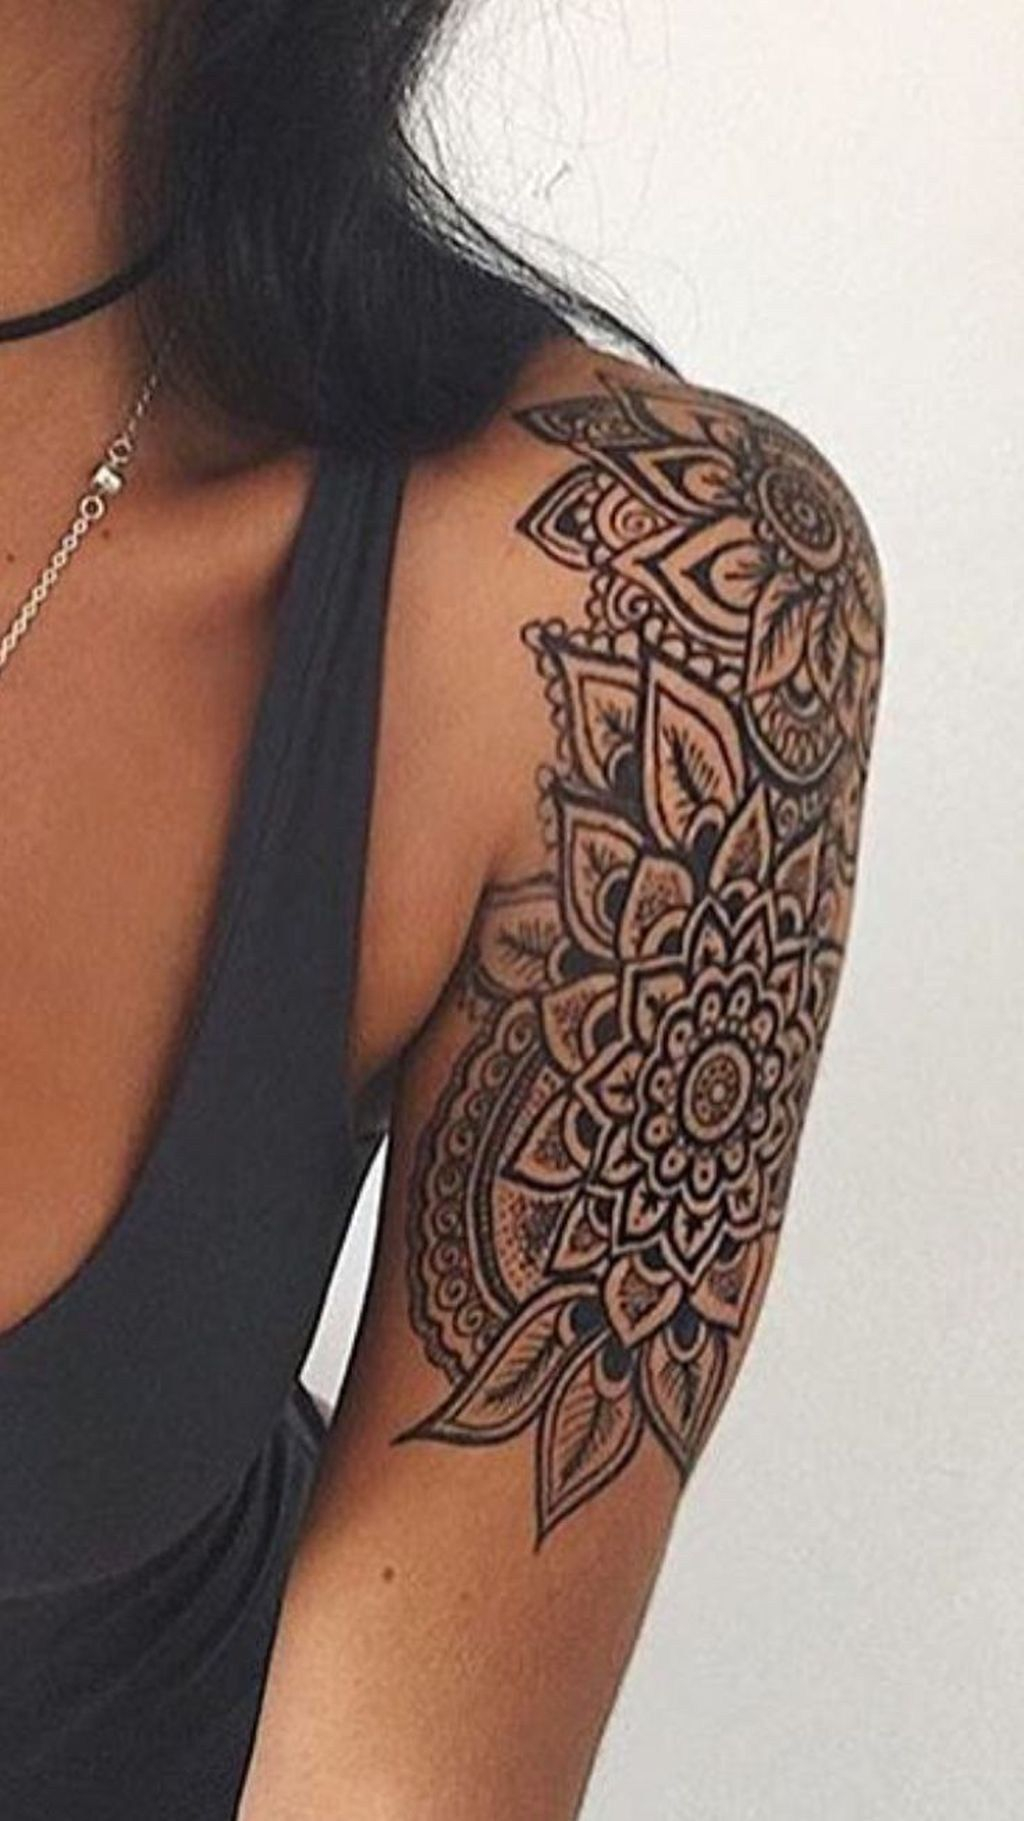 Cute Henna Lace Arm Tattoo Ideas You Should Try 17 Meaningful intended for size 1024 X 1821